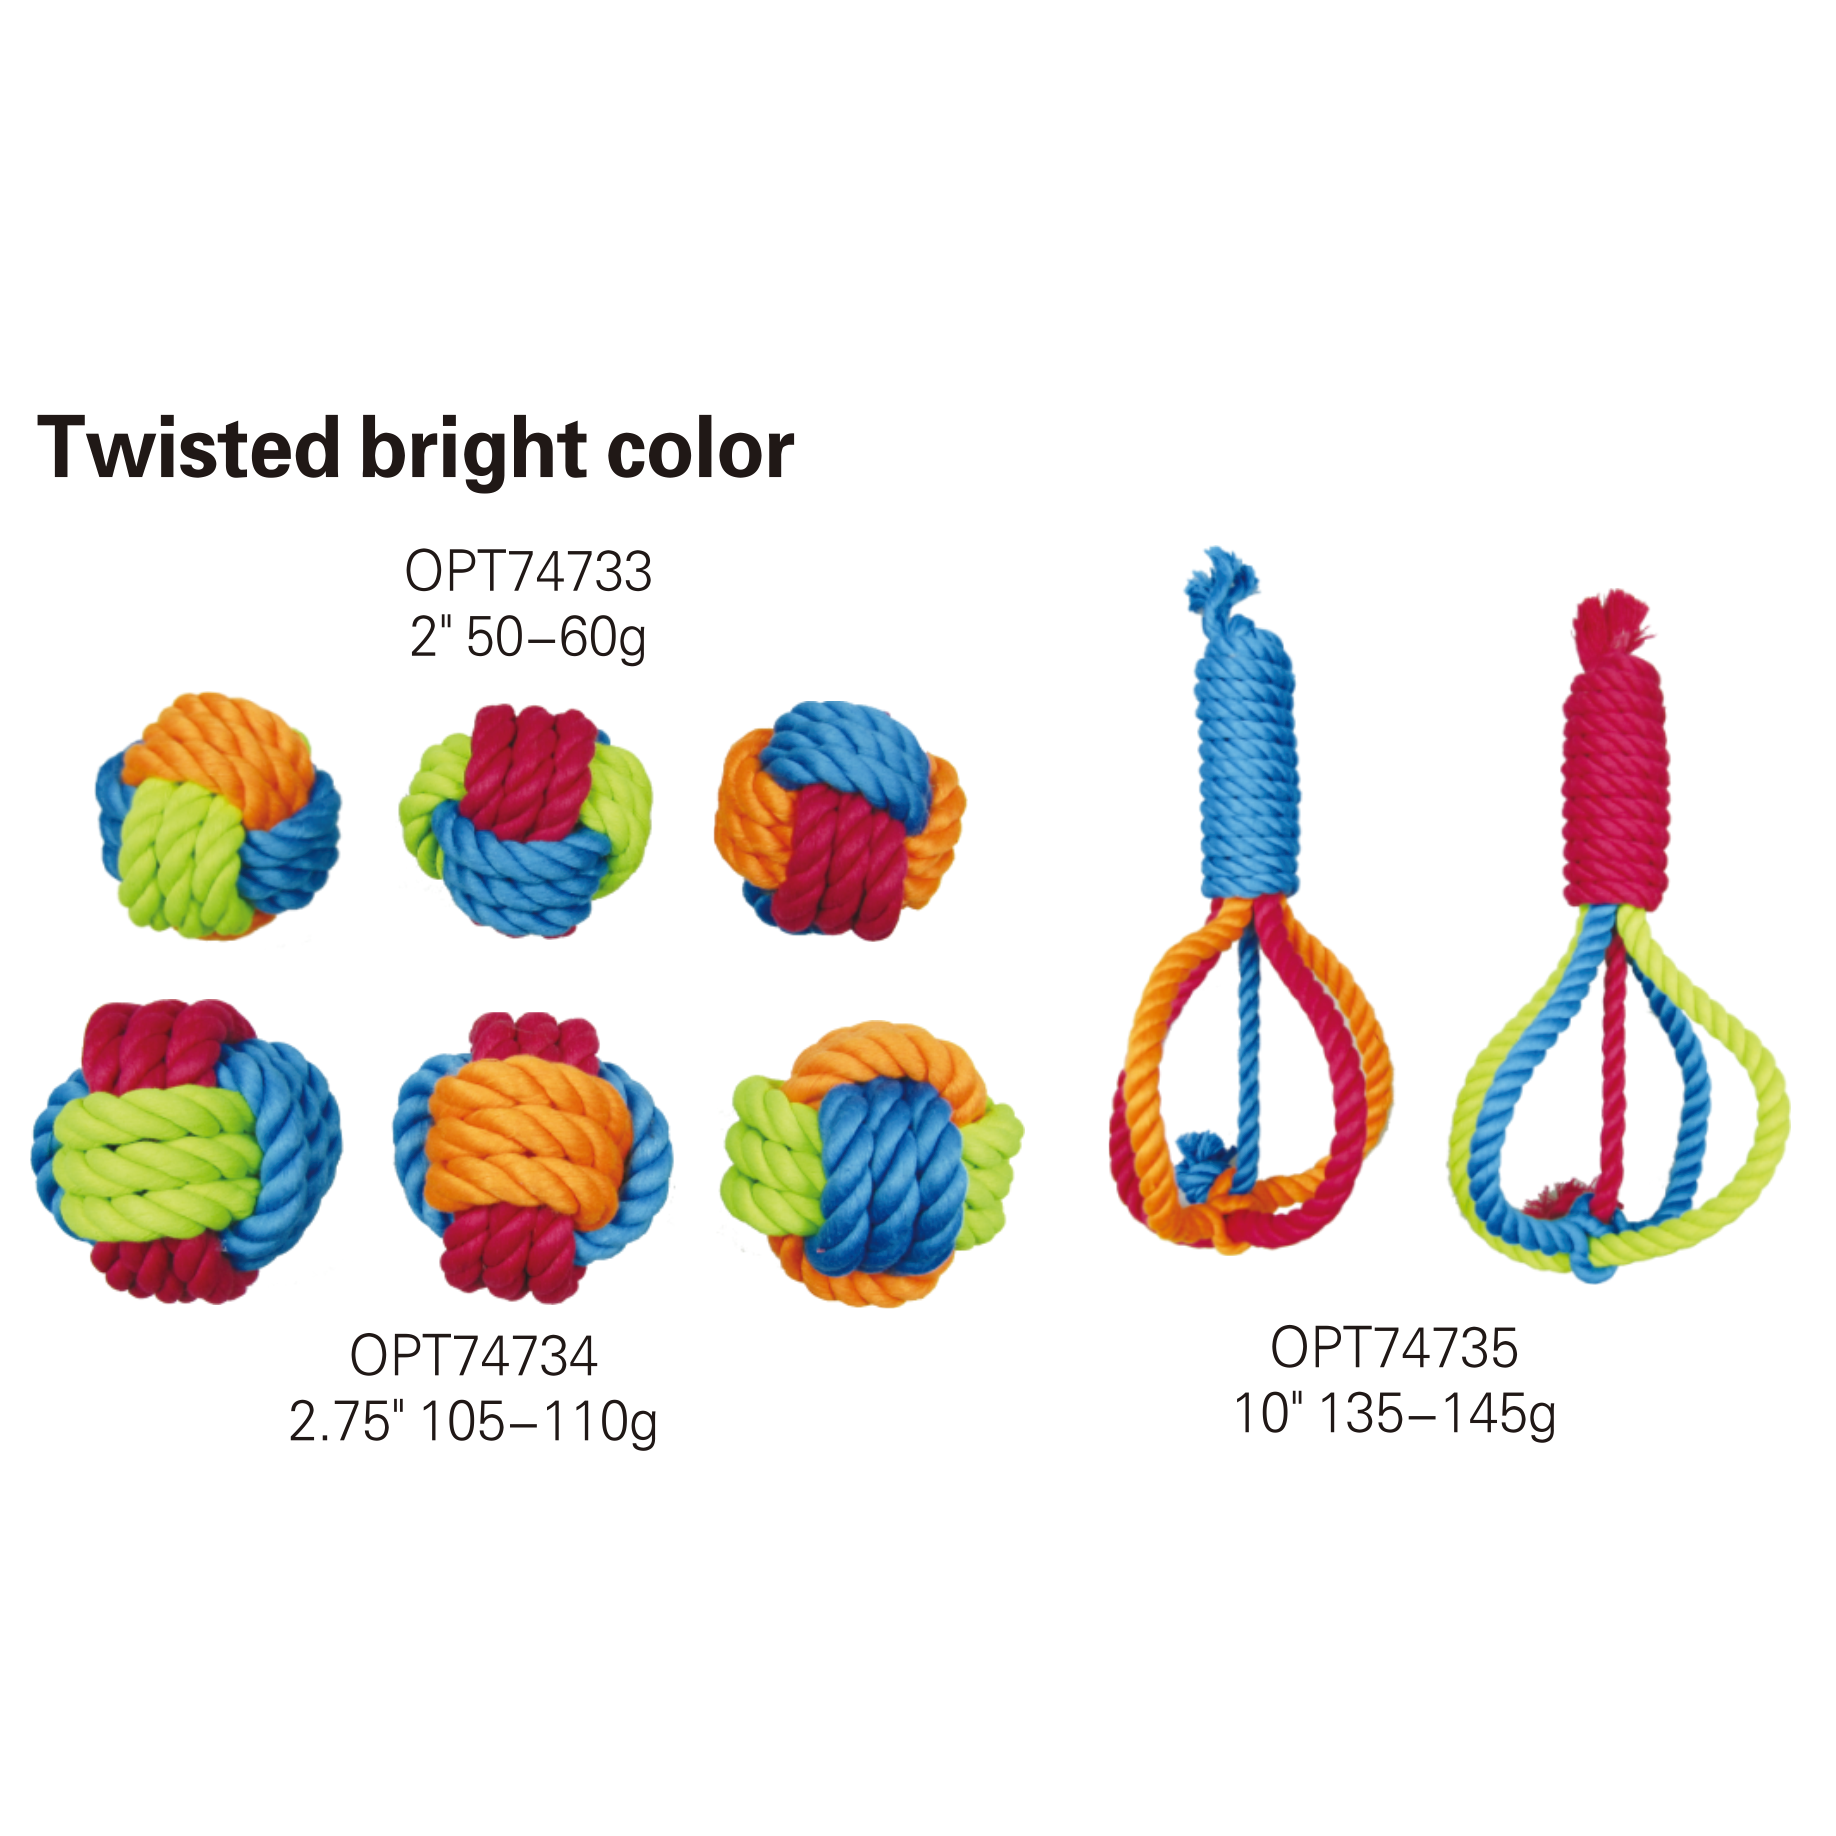 OPT74733-OPT74735 Dog toy rope